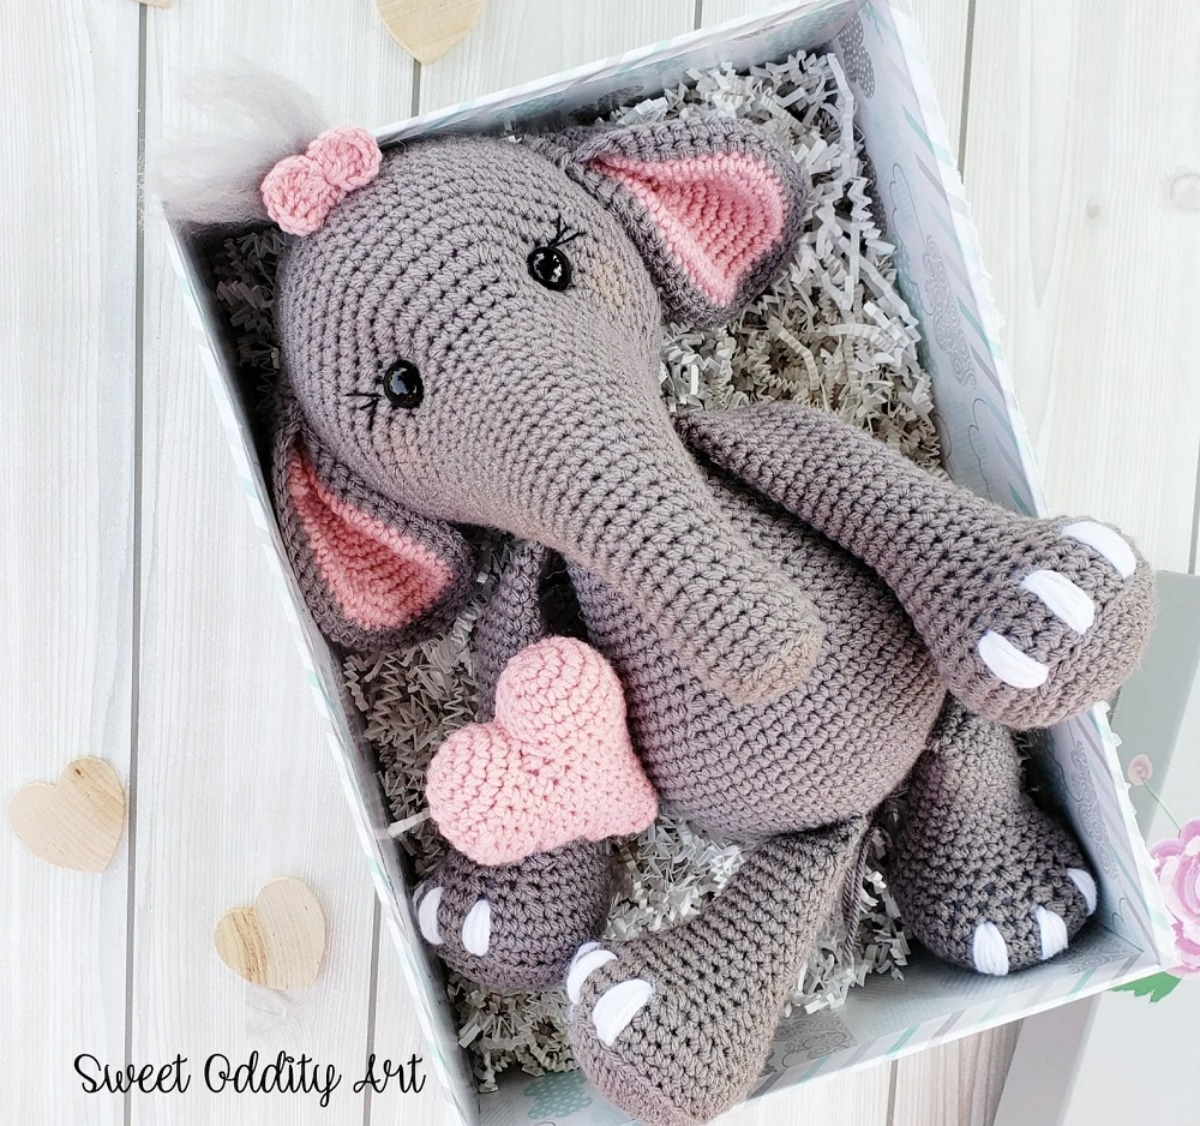 Large crochet gray Elephant with small pink ears and a pink bow on her head lying in a white box with a pink crochet heart next to her.